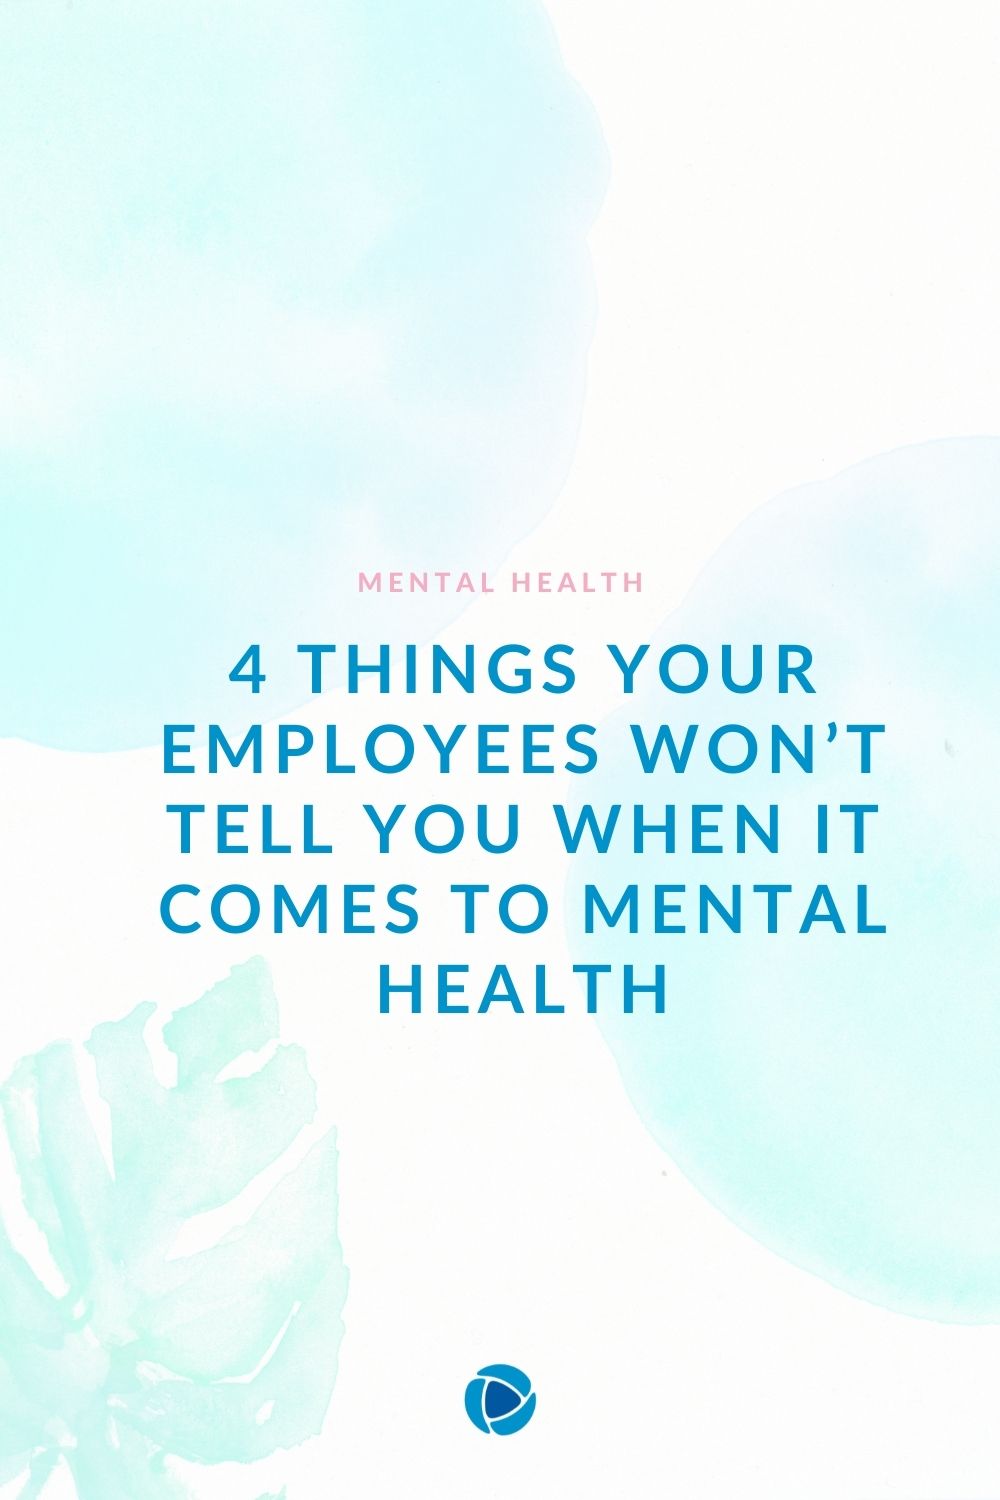 4 things your employees won’t tell you when it comes to mental health